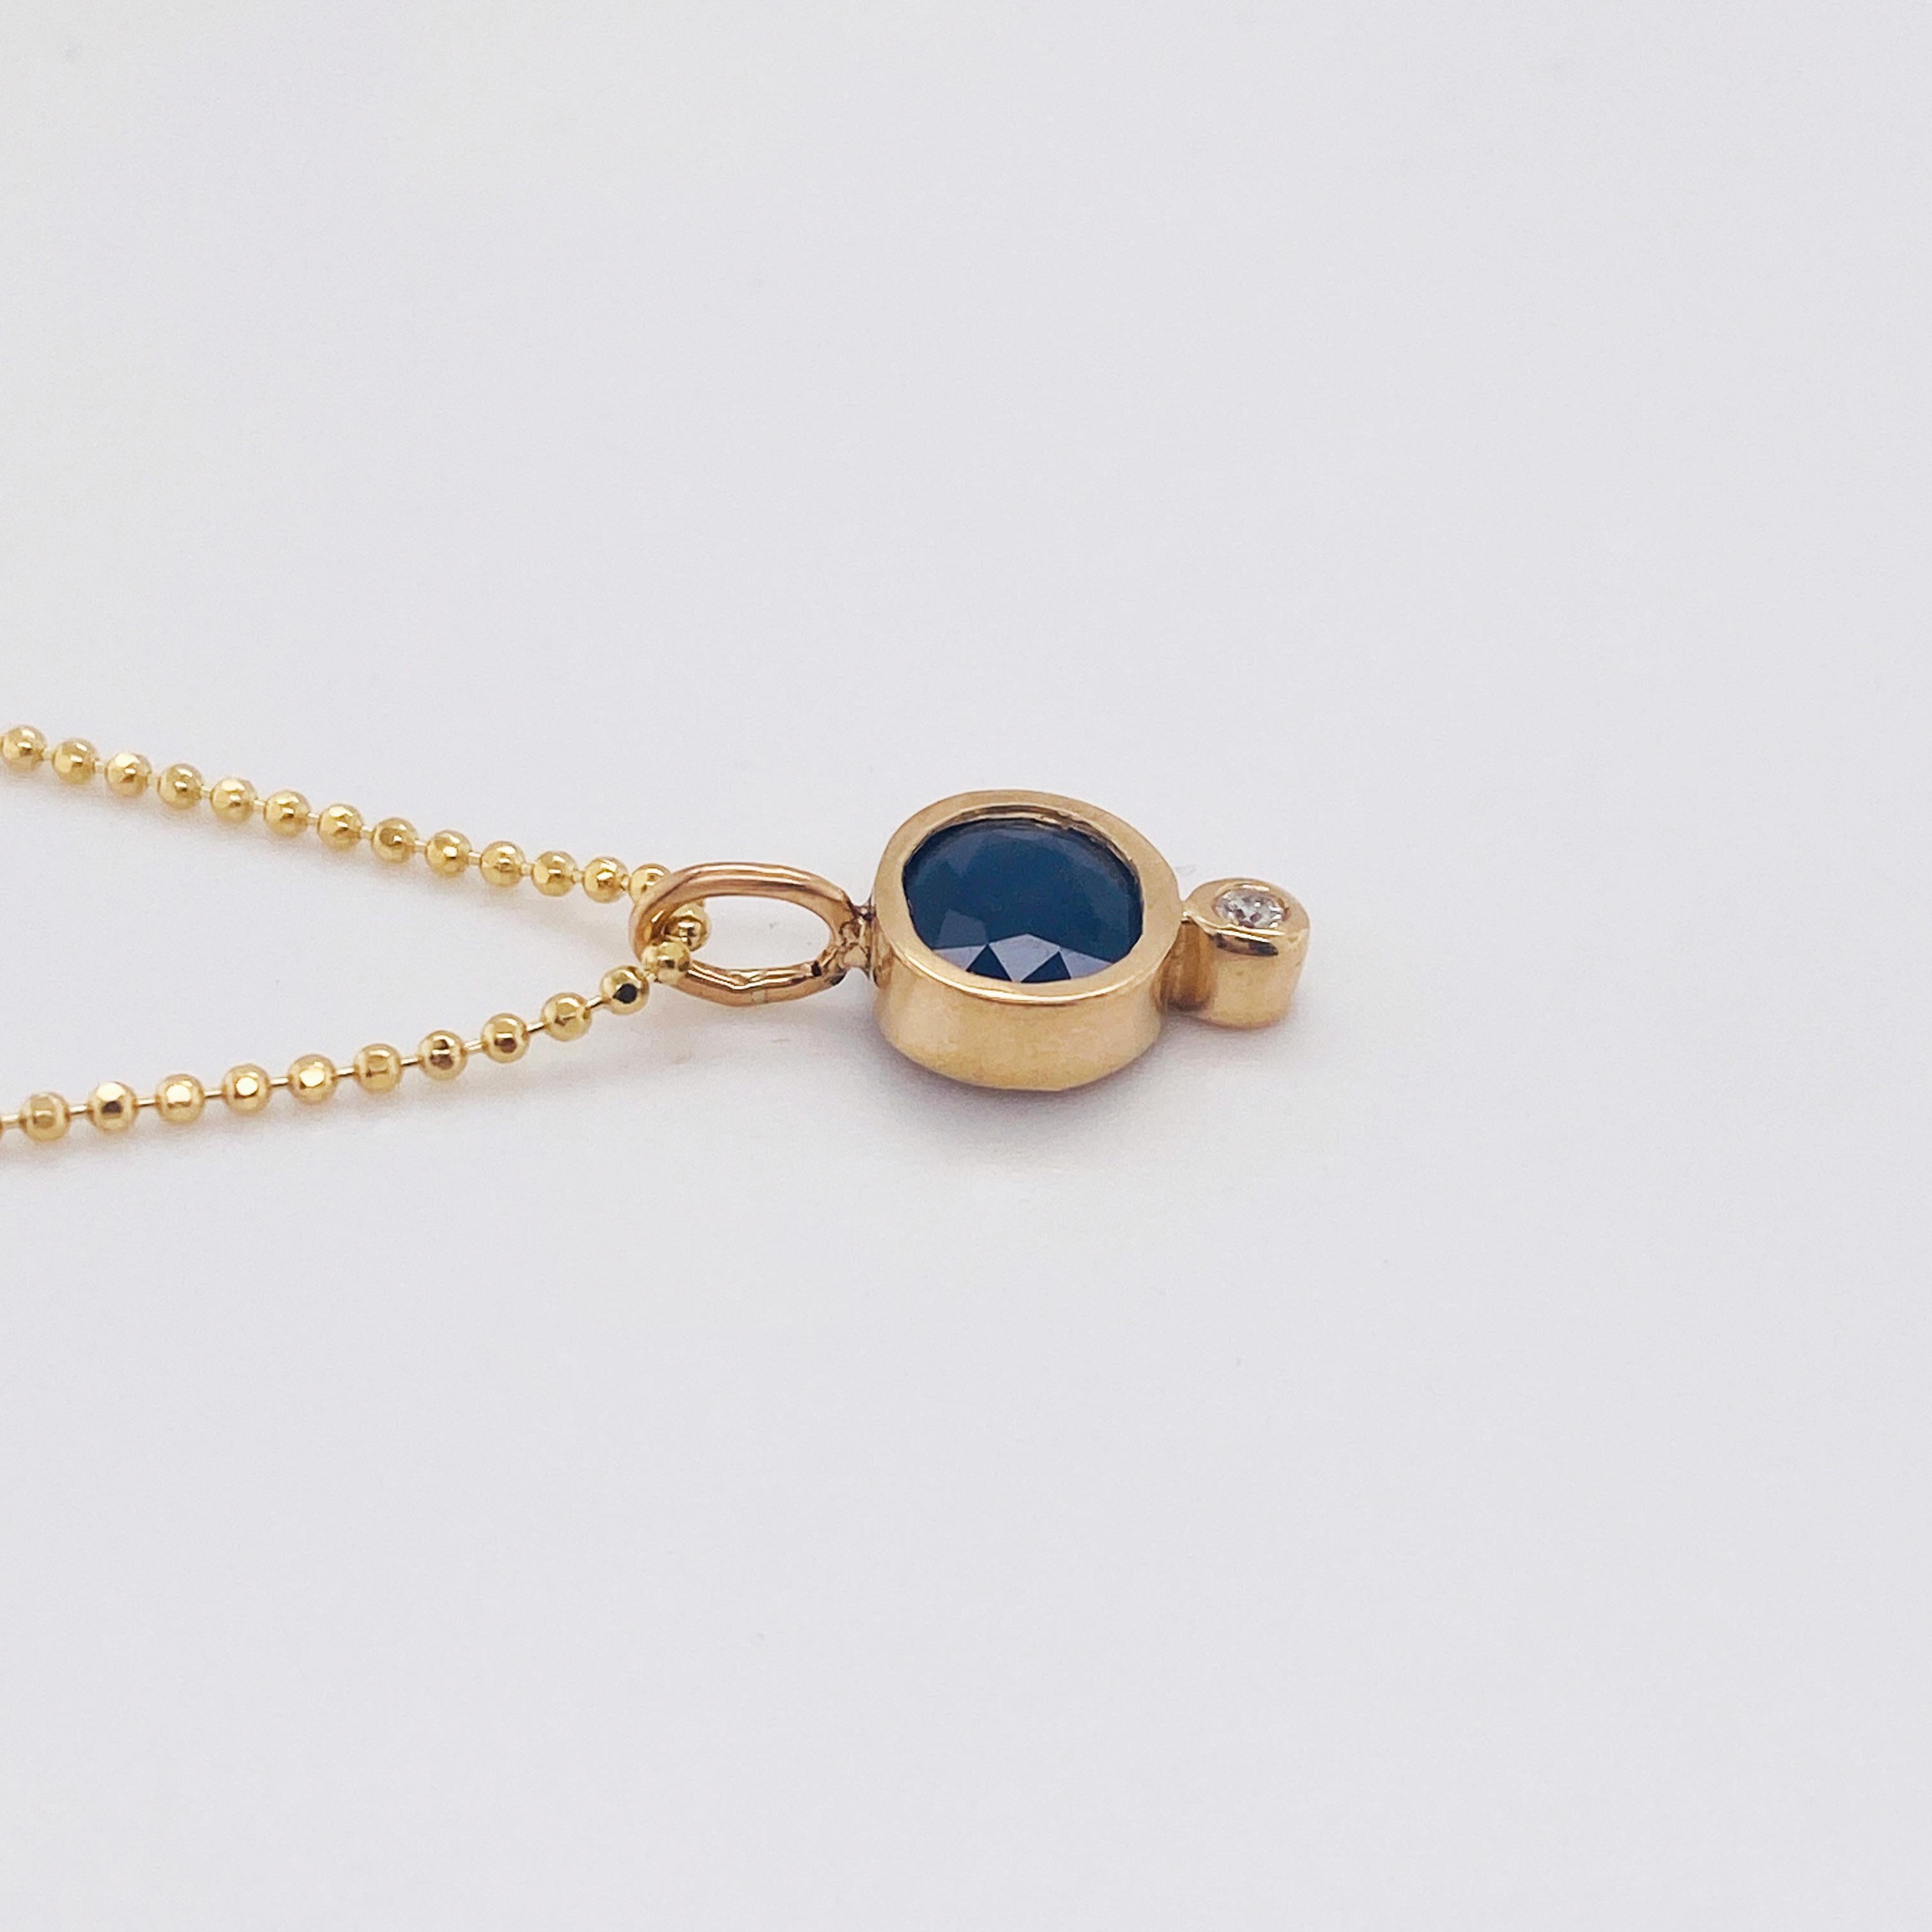 Modern Oval Sapphire and Diamond Pendant Necklace 14k Yellow Gold, 1.65 ct Sapphire For Sale